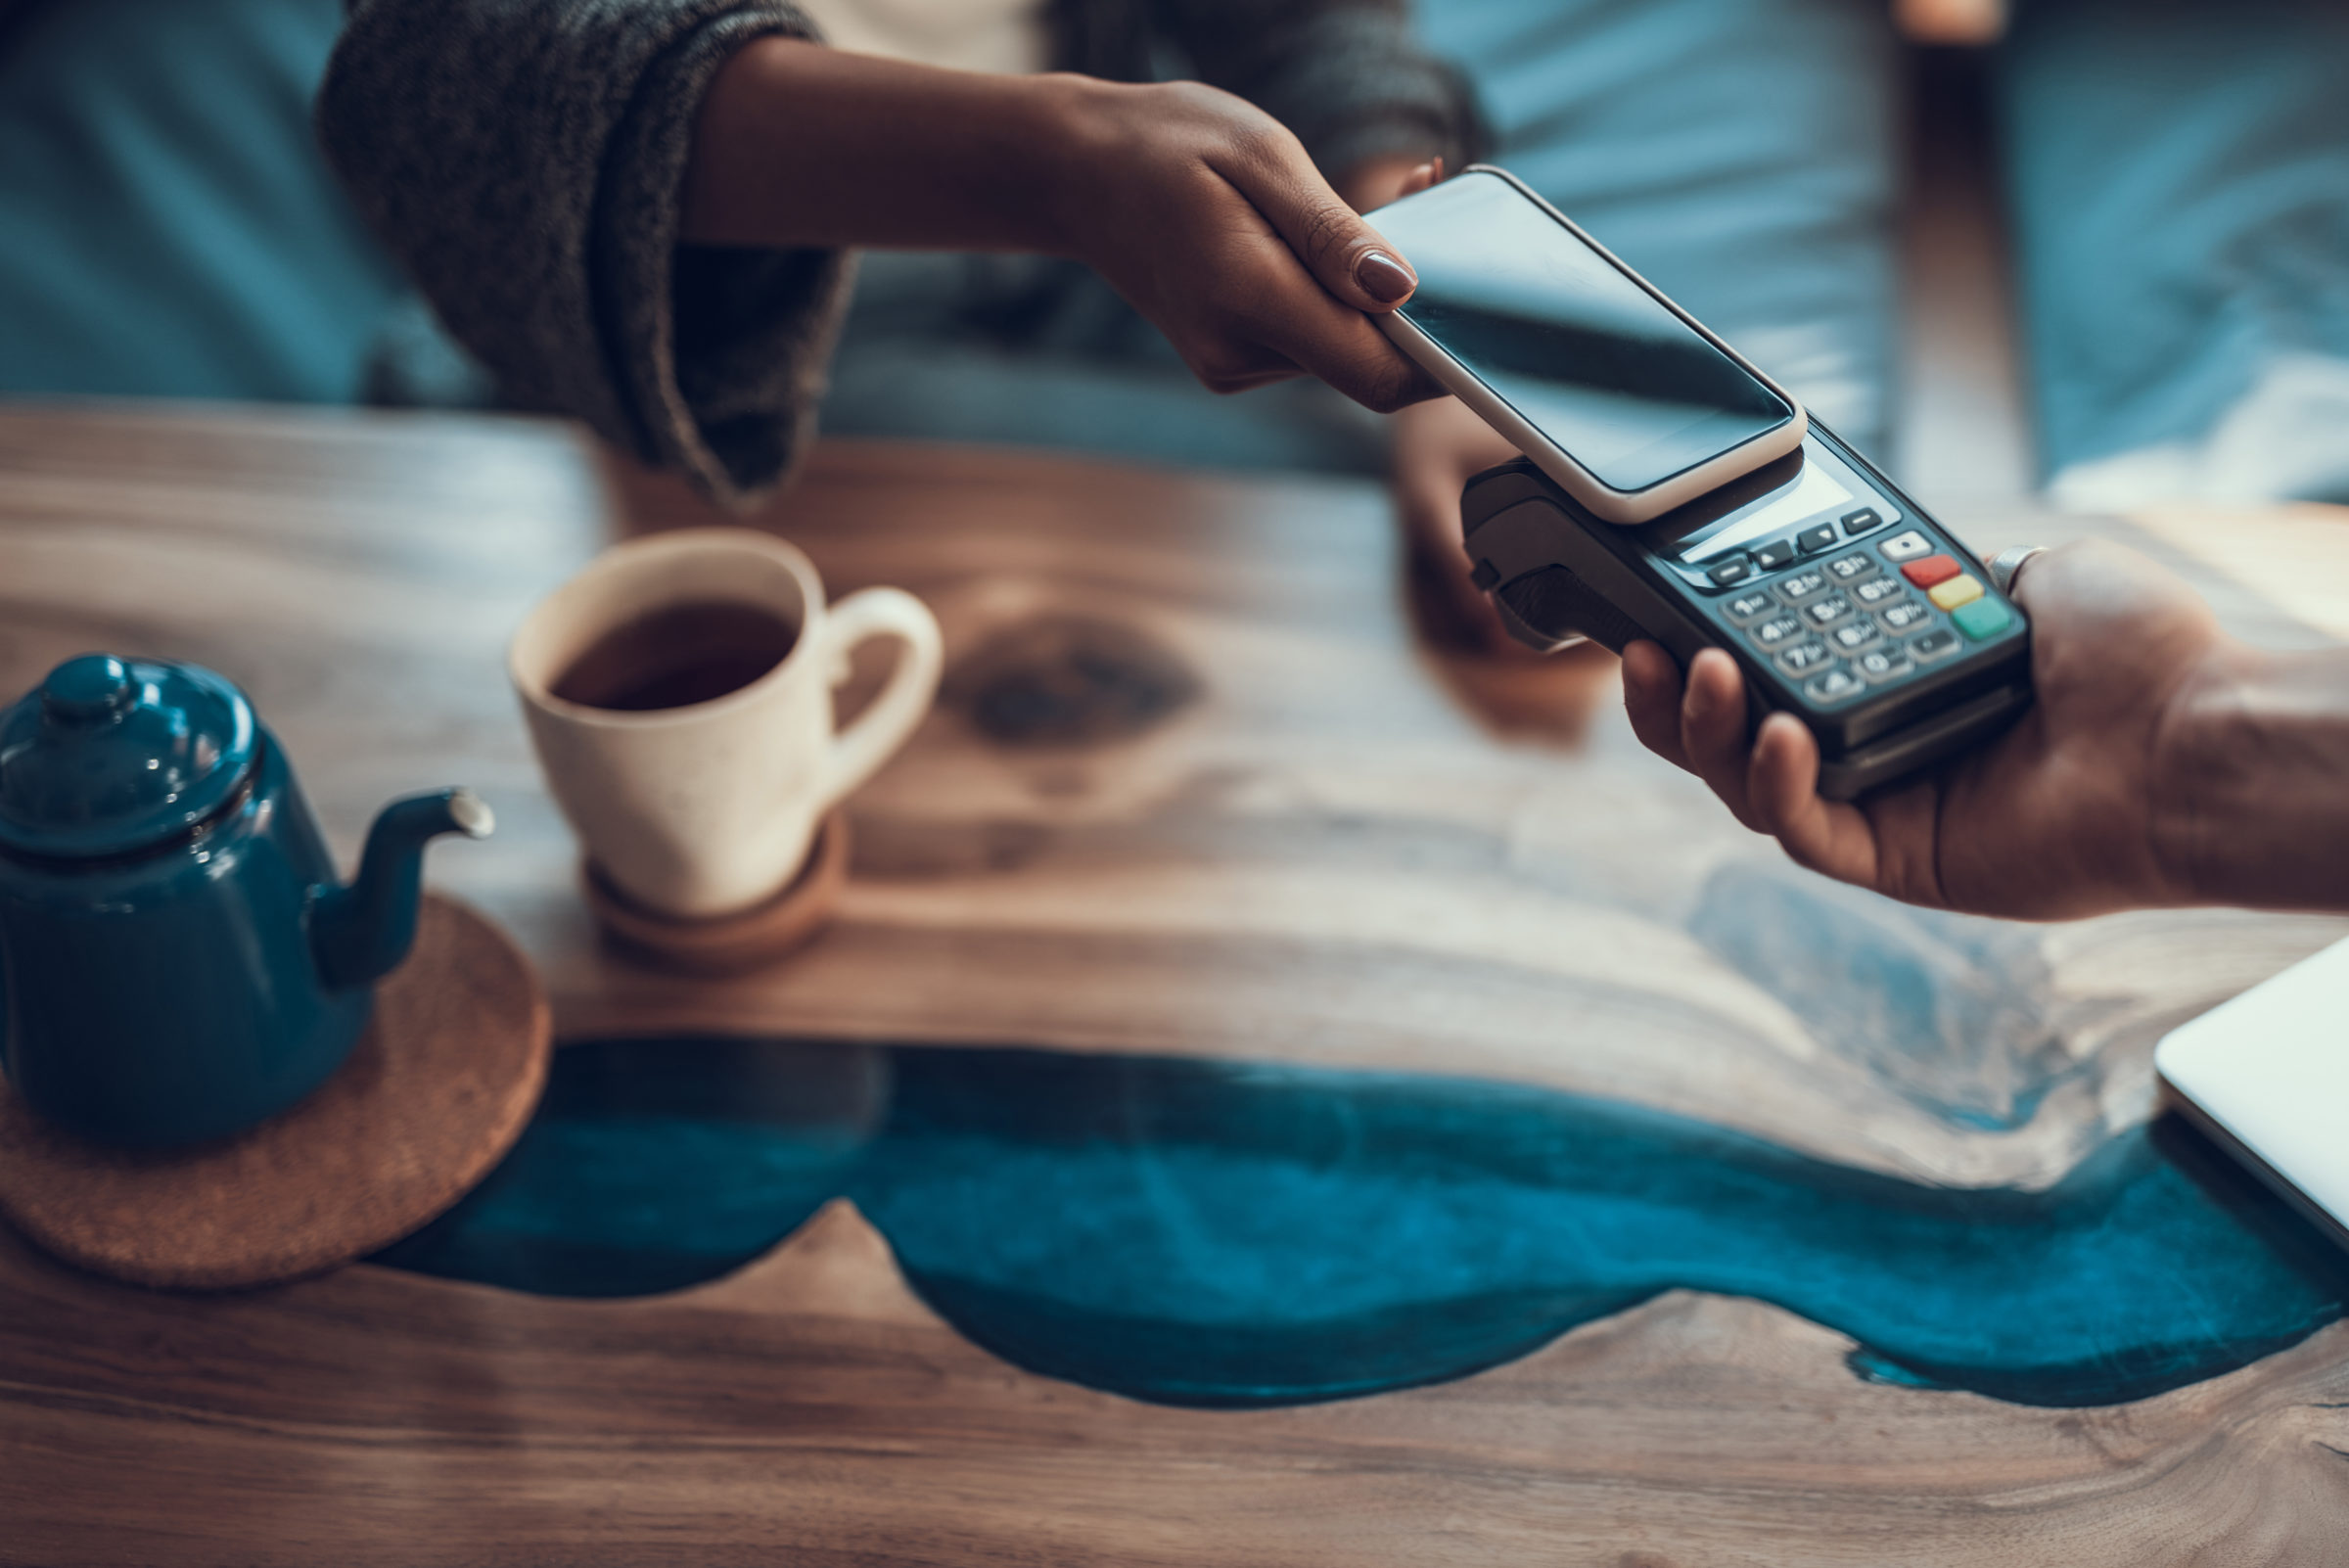 The Power of Payments: Why the European Payments Market is Hotter than Ever